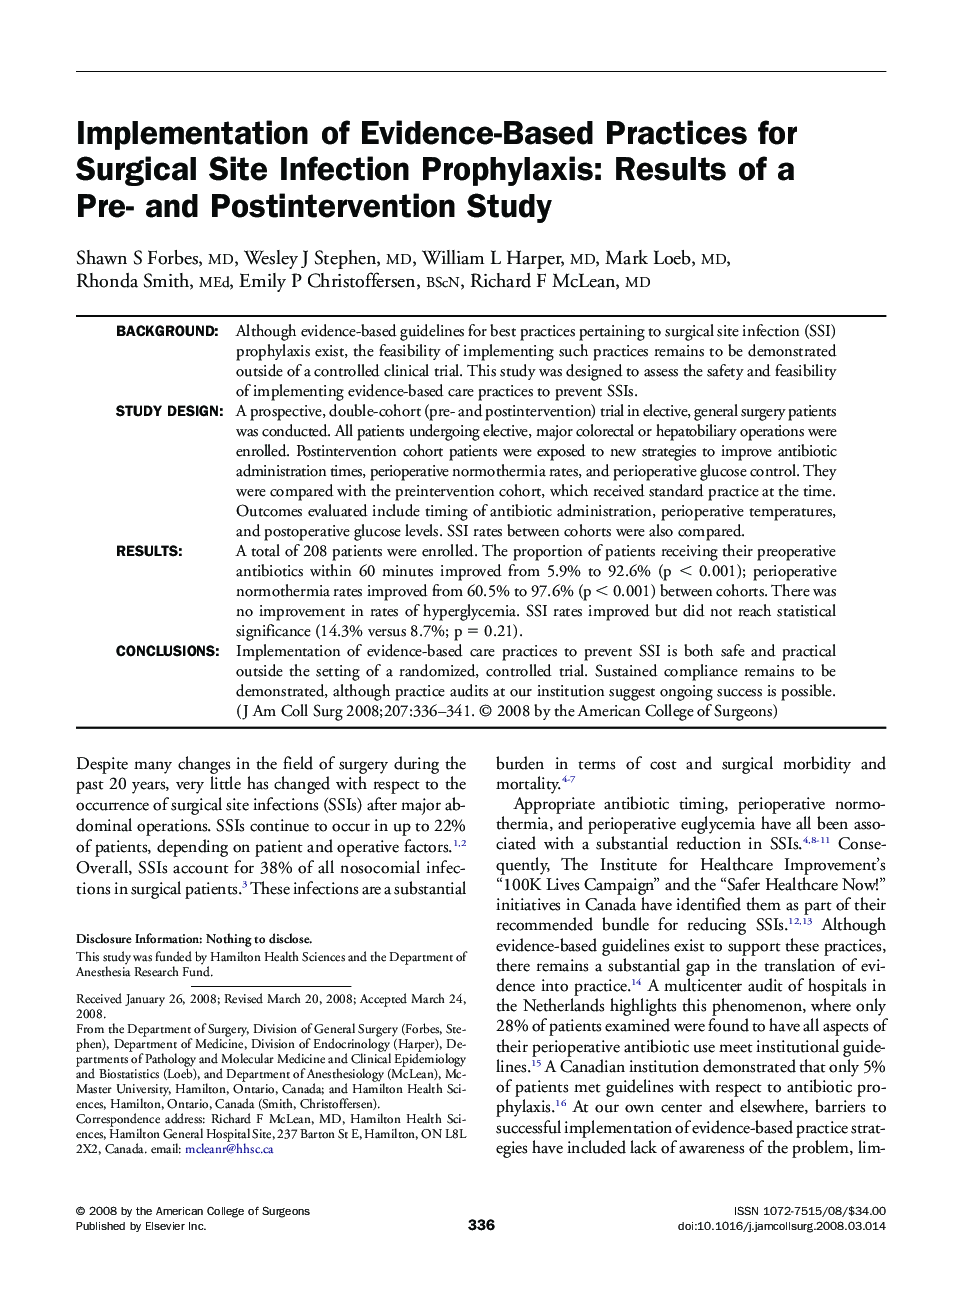 Implementation of Evidence-Based Practices for Surgical Site Infection Prophylaxis: Results of a Pre- and Postintervention Study 